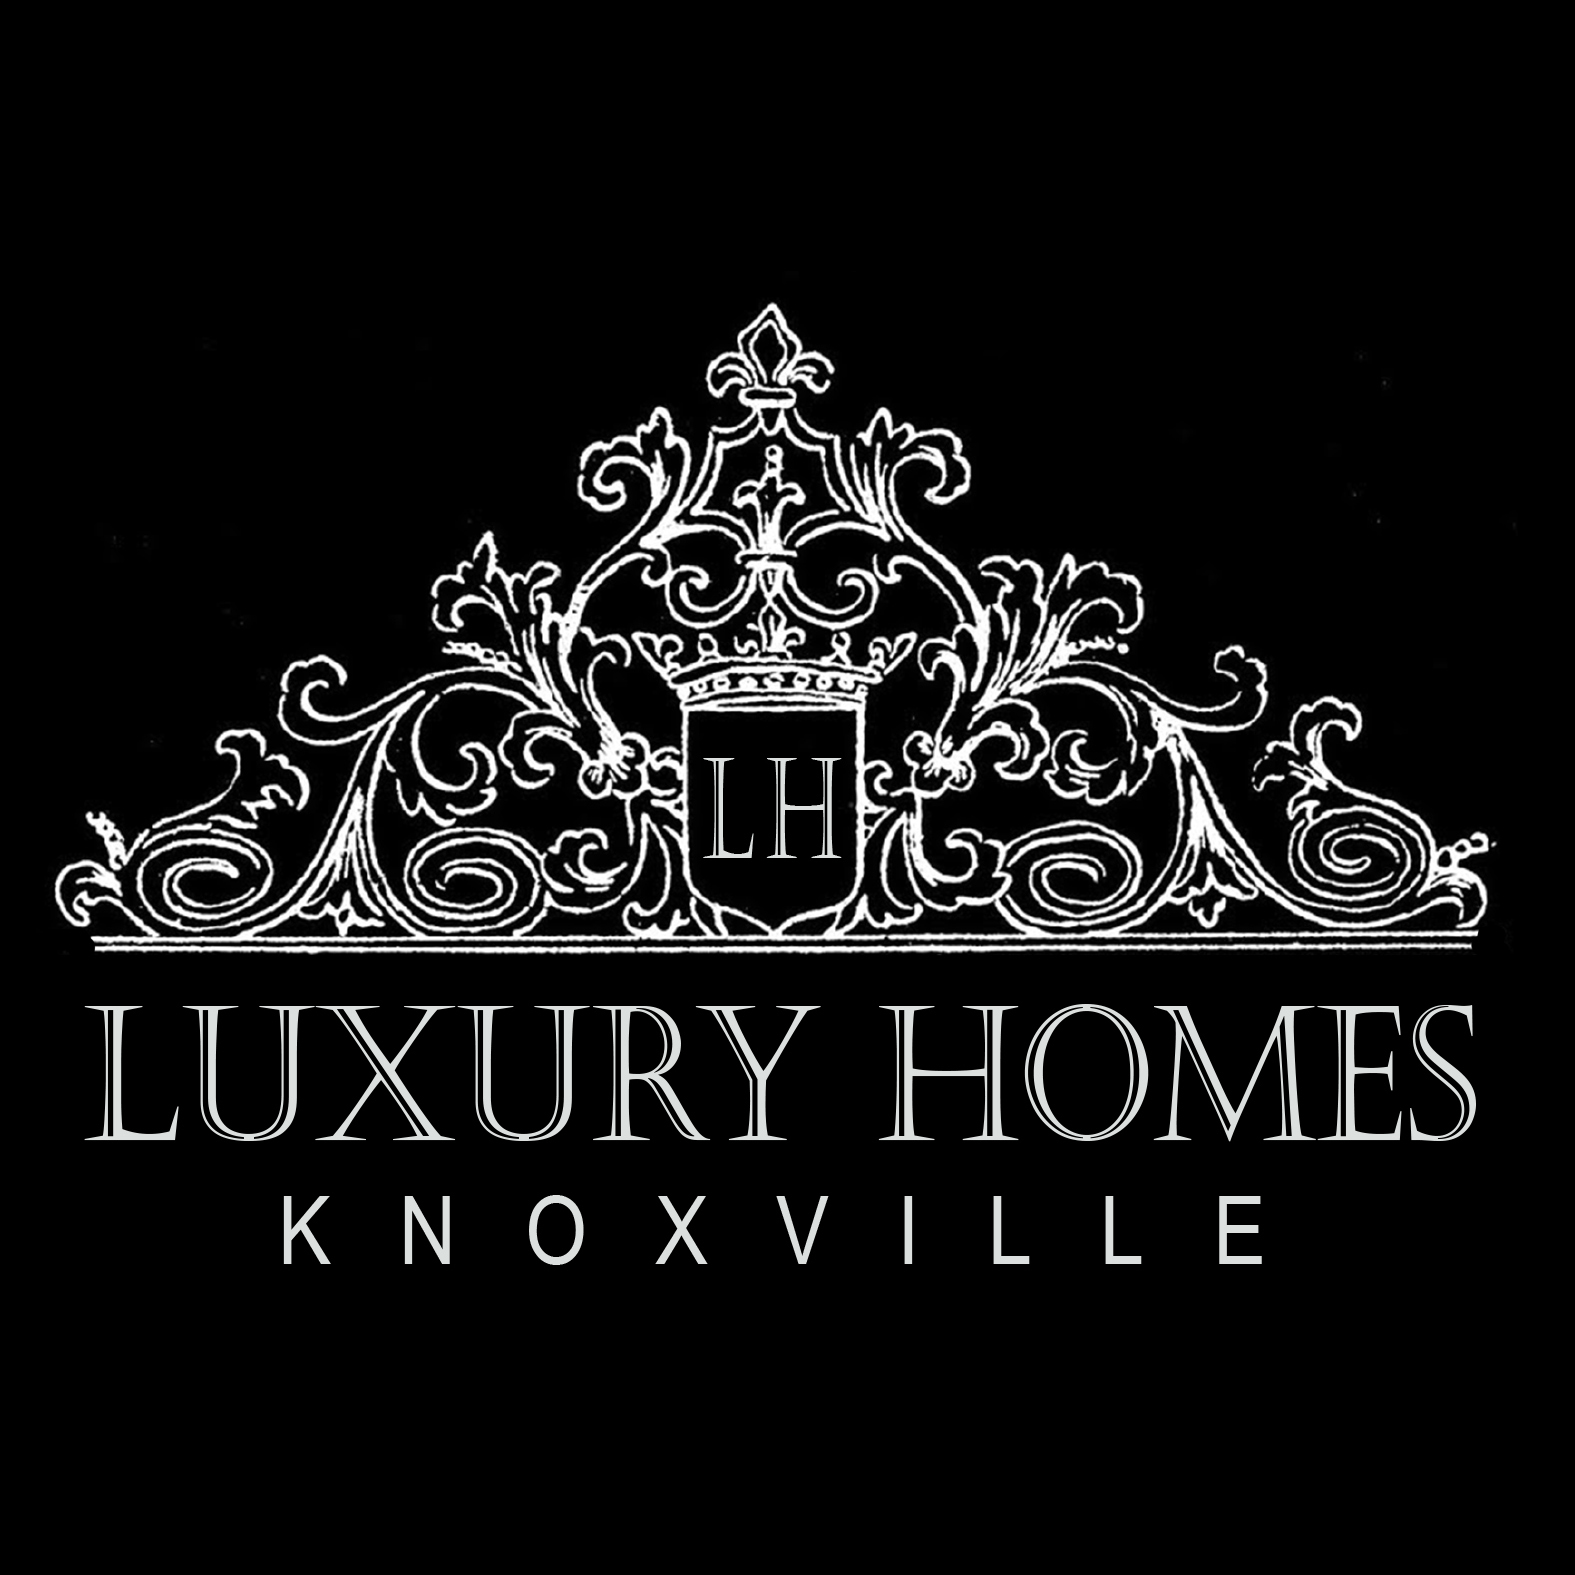 Luxury Homes: Knoxville Luxury Homes